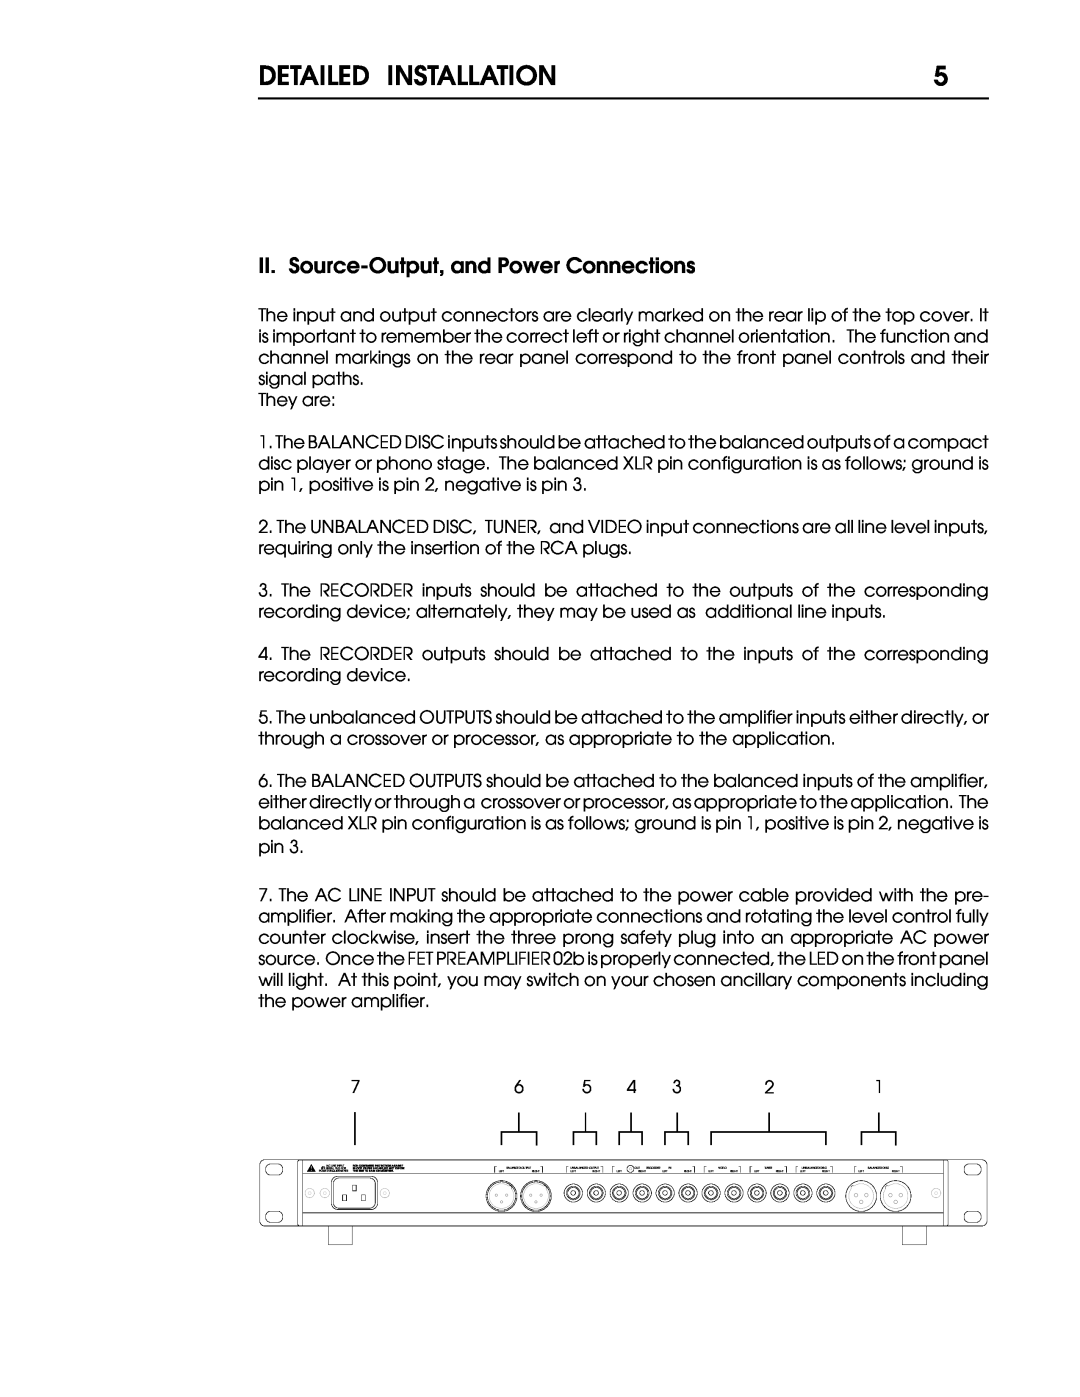 Coda 02b operation manual Detailed Installation, II. Source-Output,and Power Connections 